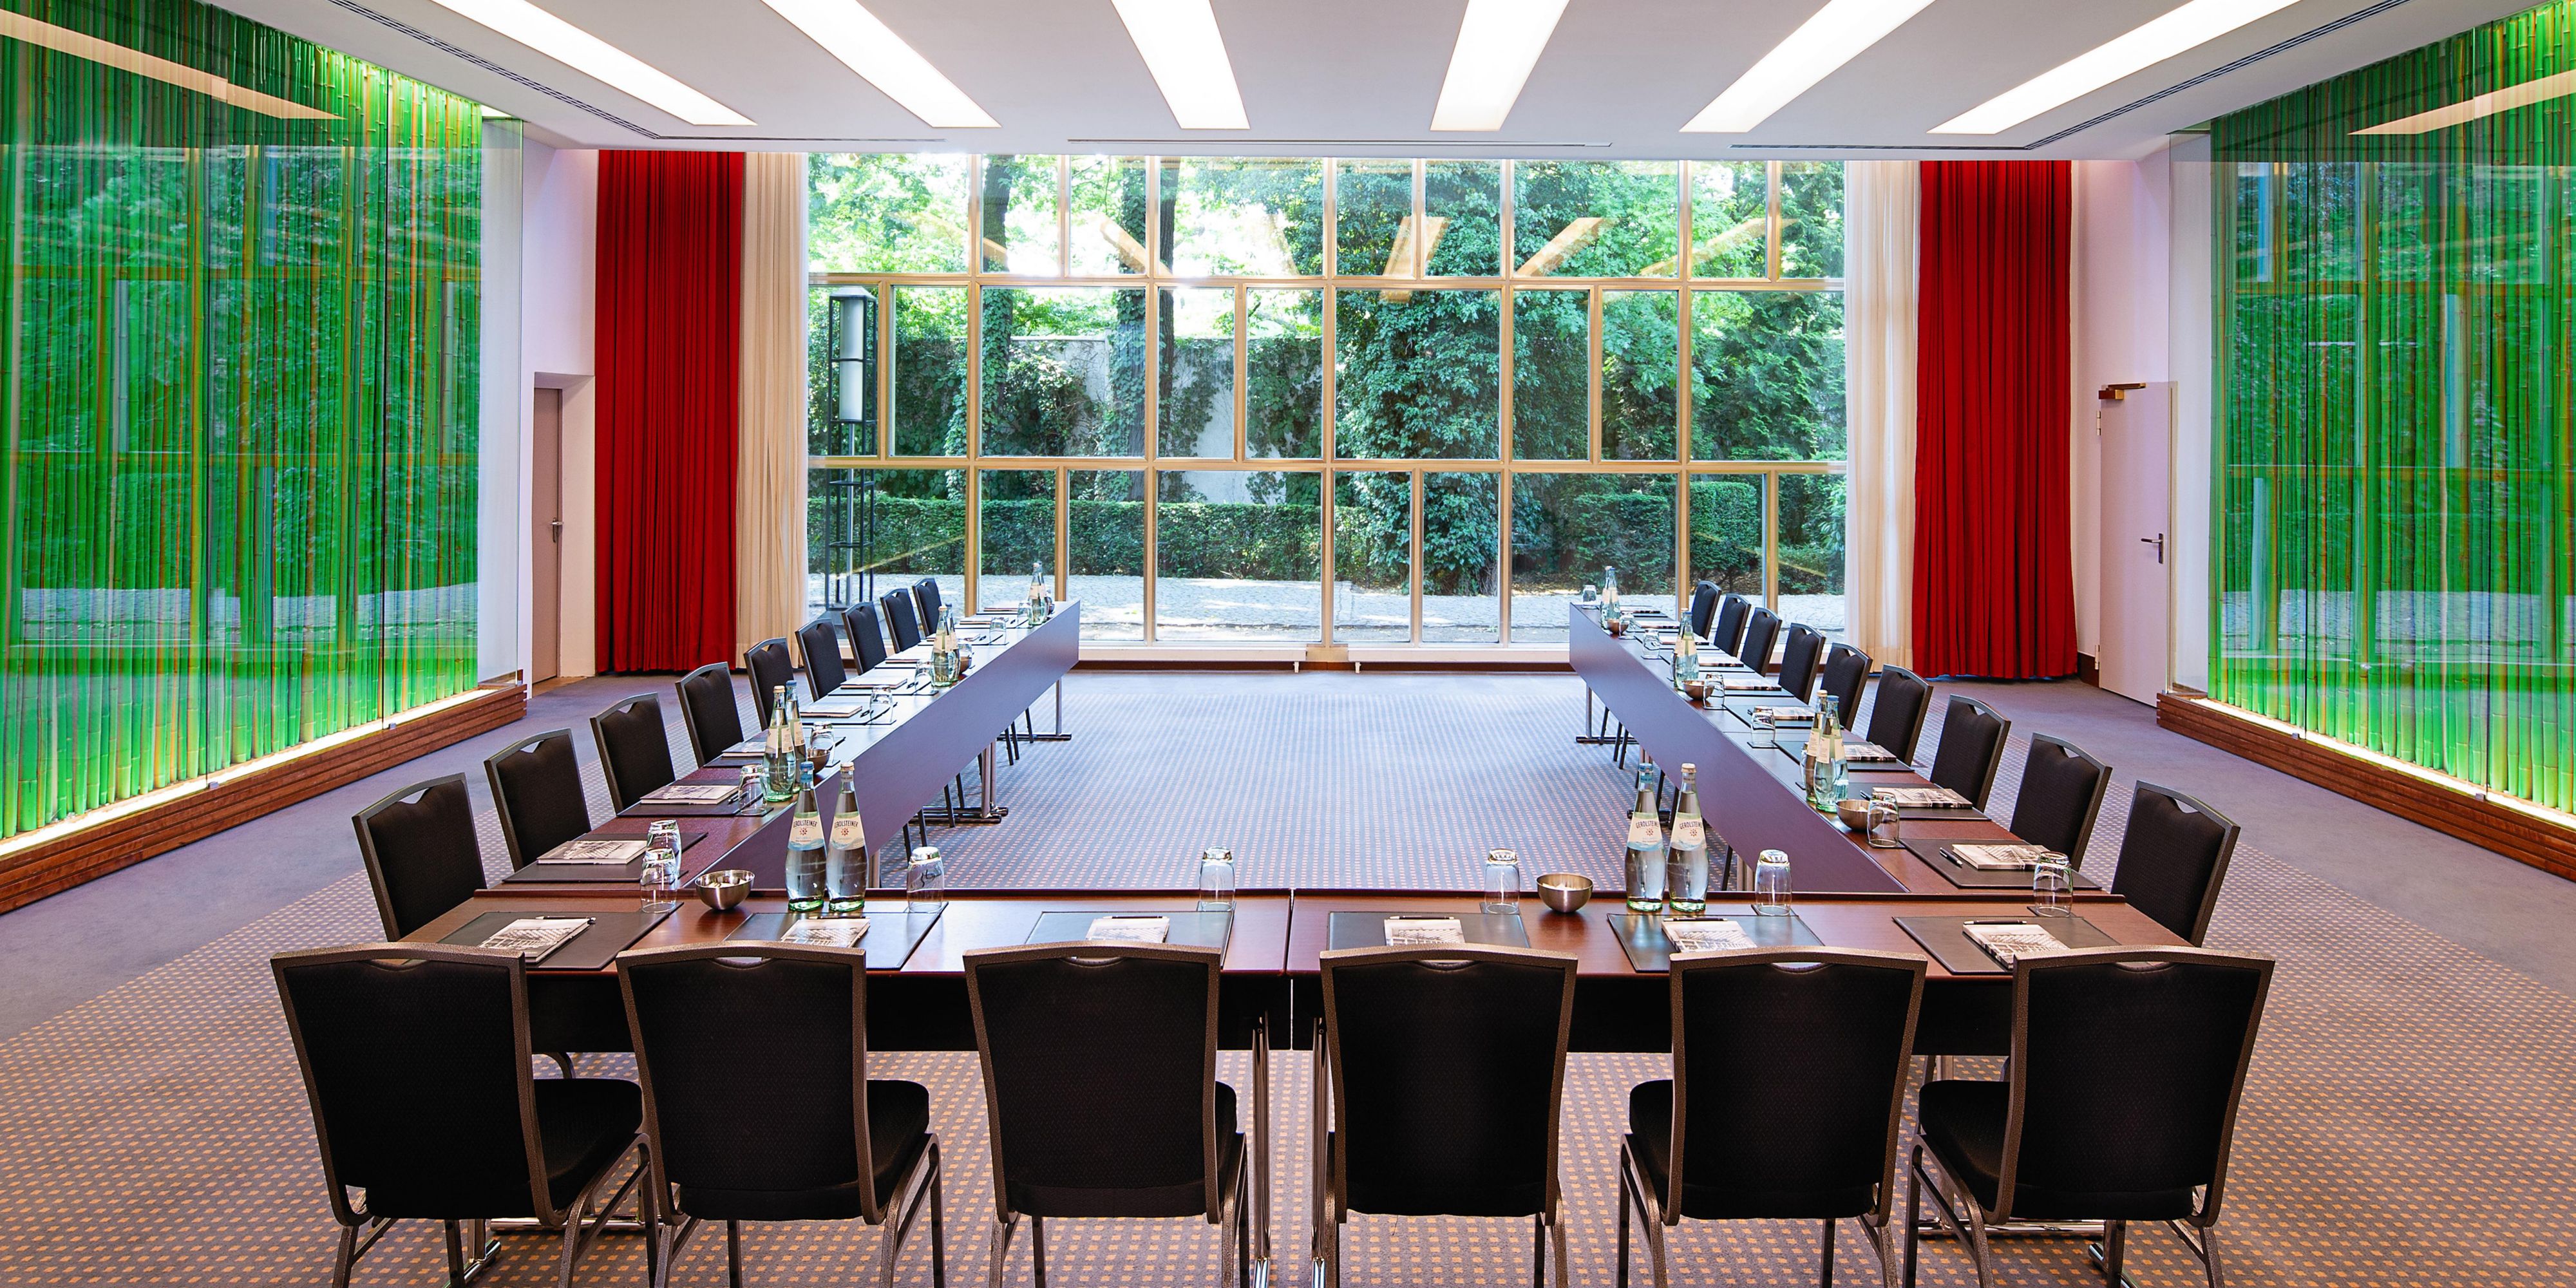 As one of the largest conference hotels in Europe, located directly at the Tiergarten in Berlin, the InterContinental Berlin offers the ideal setting for your event with 55 event rooms and a total area of 6,200 m2. With state-of-the-art technologies and a highly experienced and professional team, we have perfect solutions for your requirements.